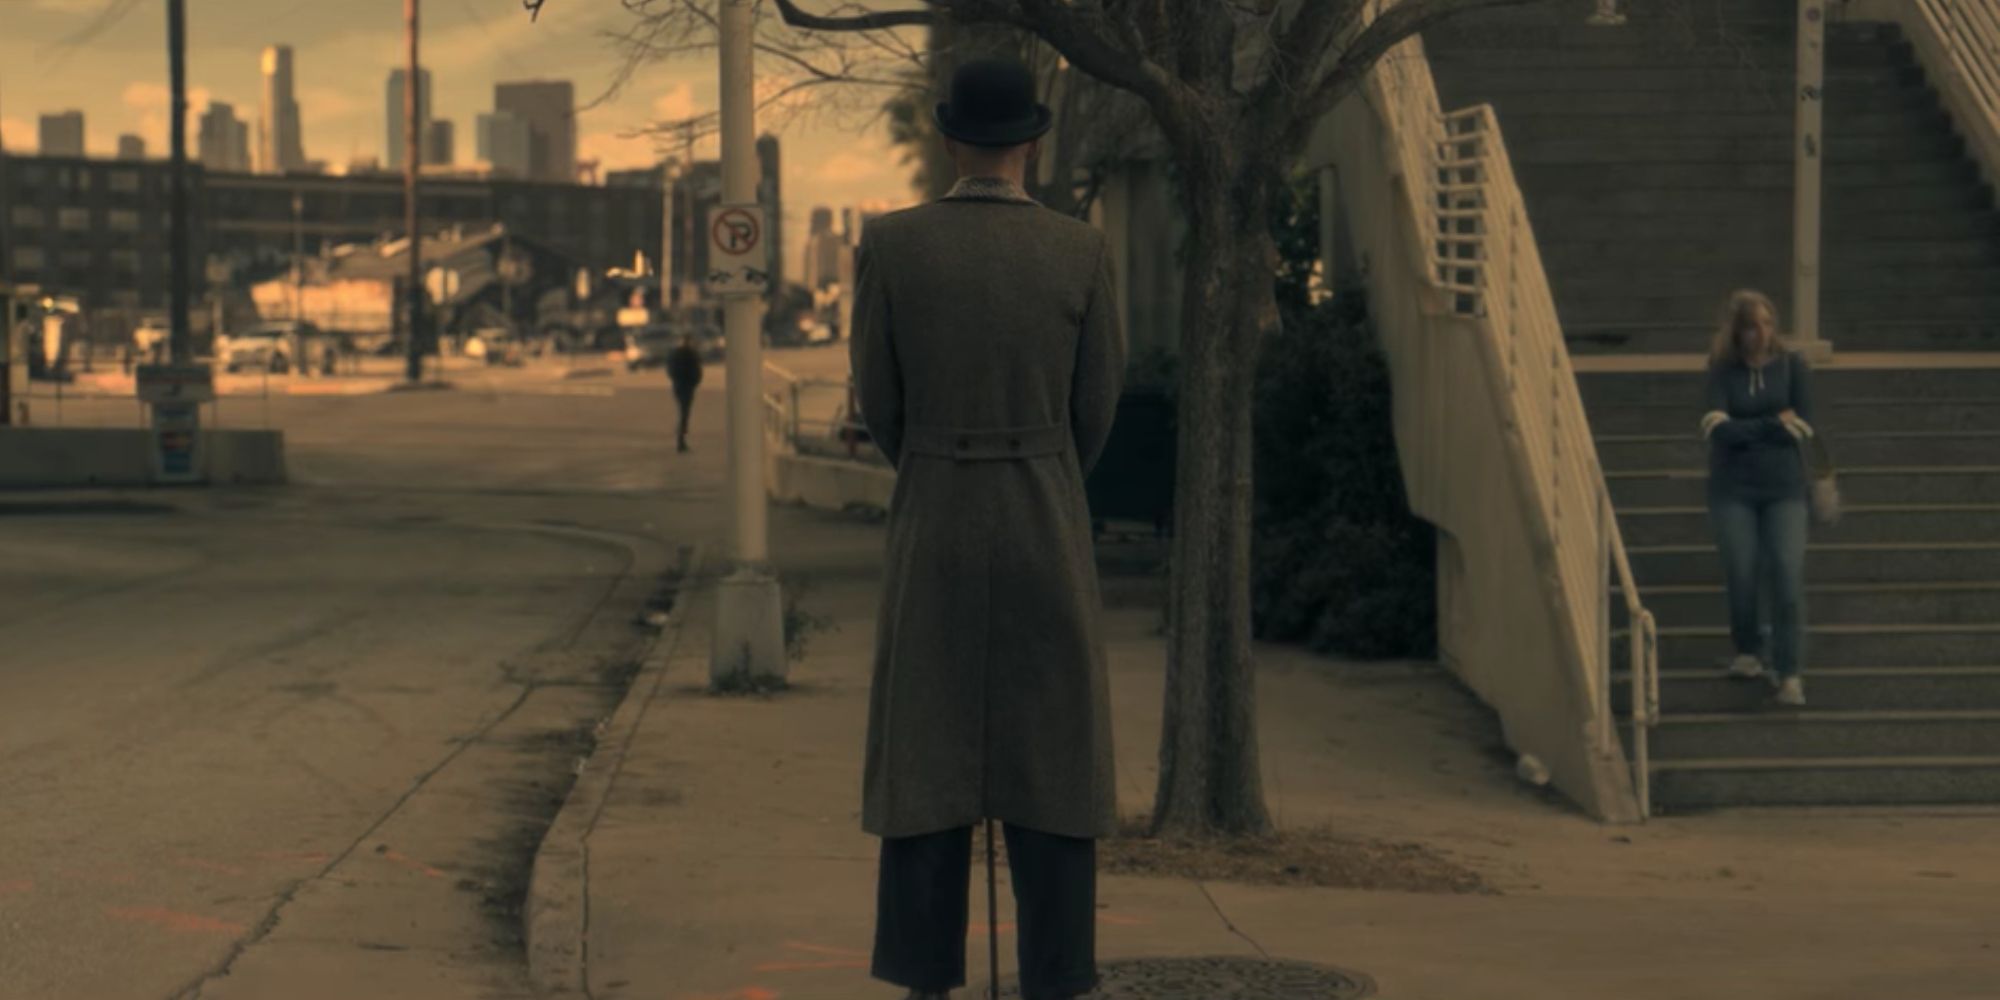 The Tall Man ghost (William Hill) stands in the street in The Haunting of Hill House